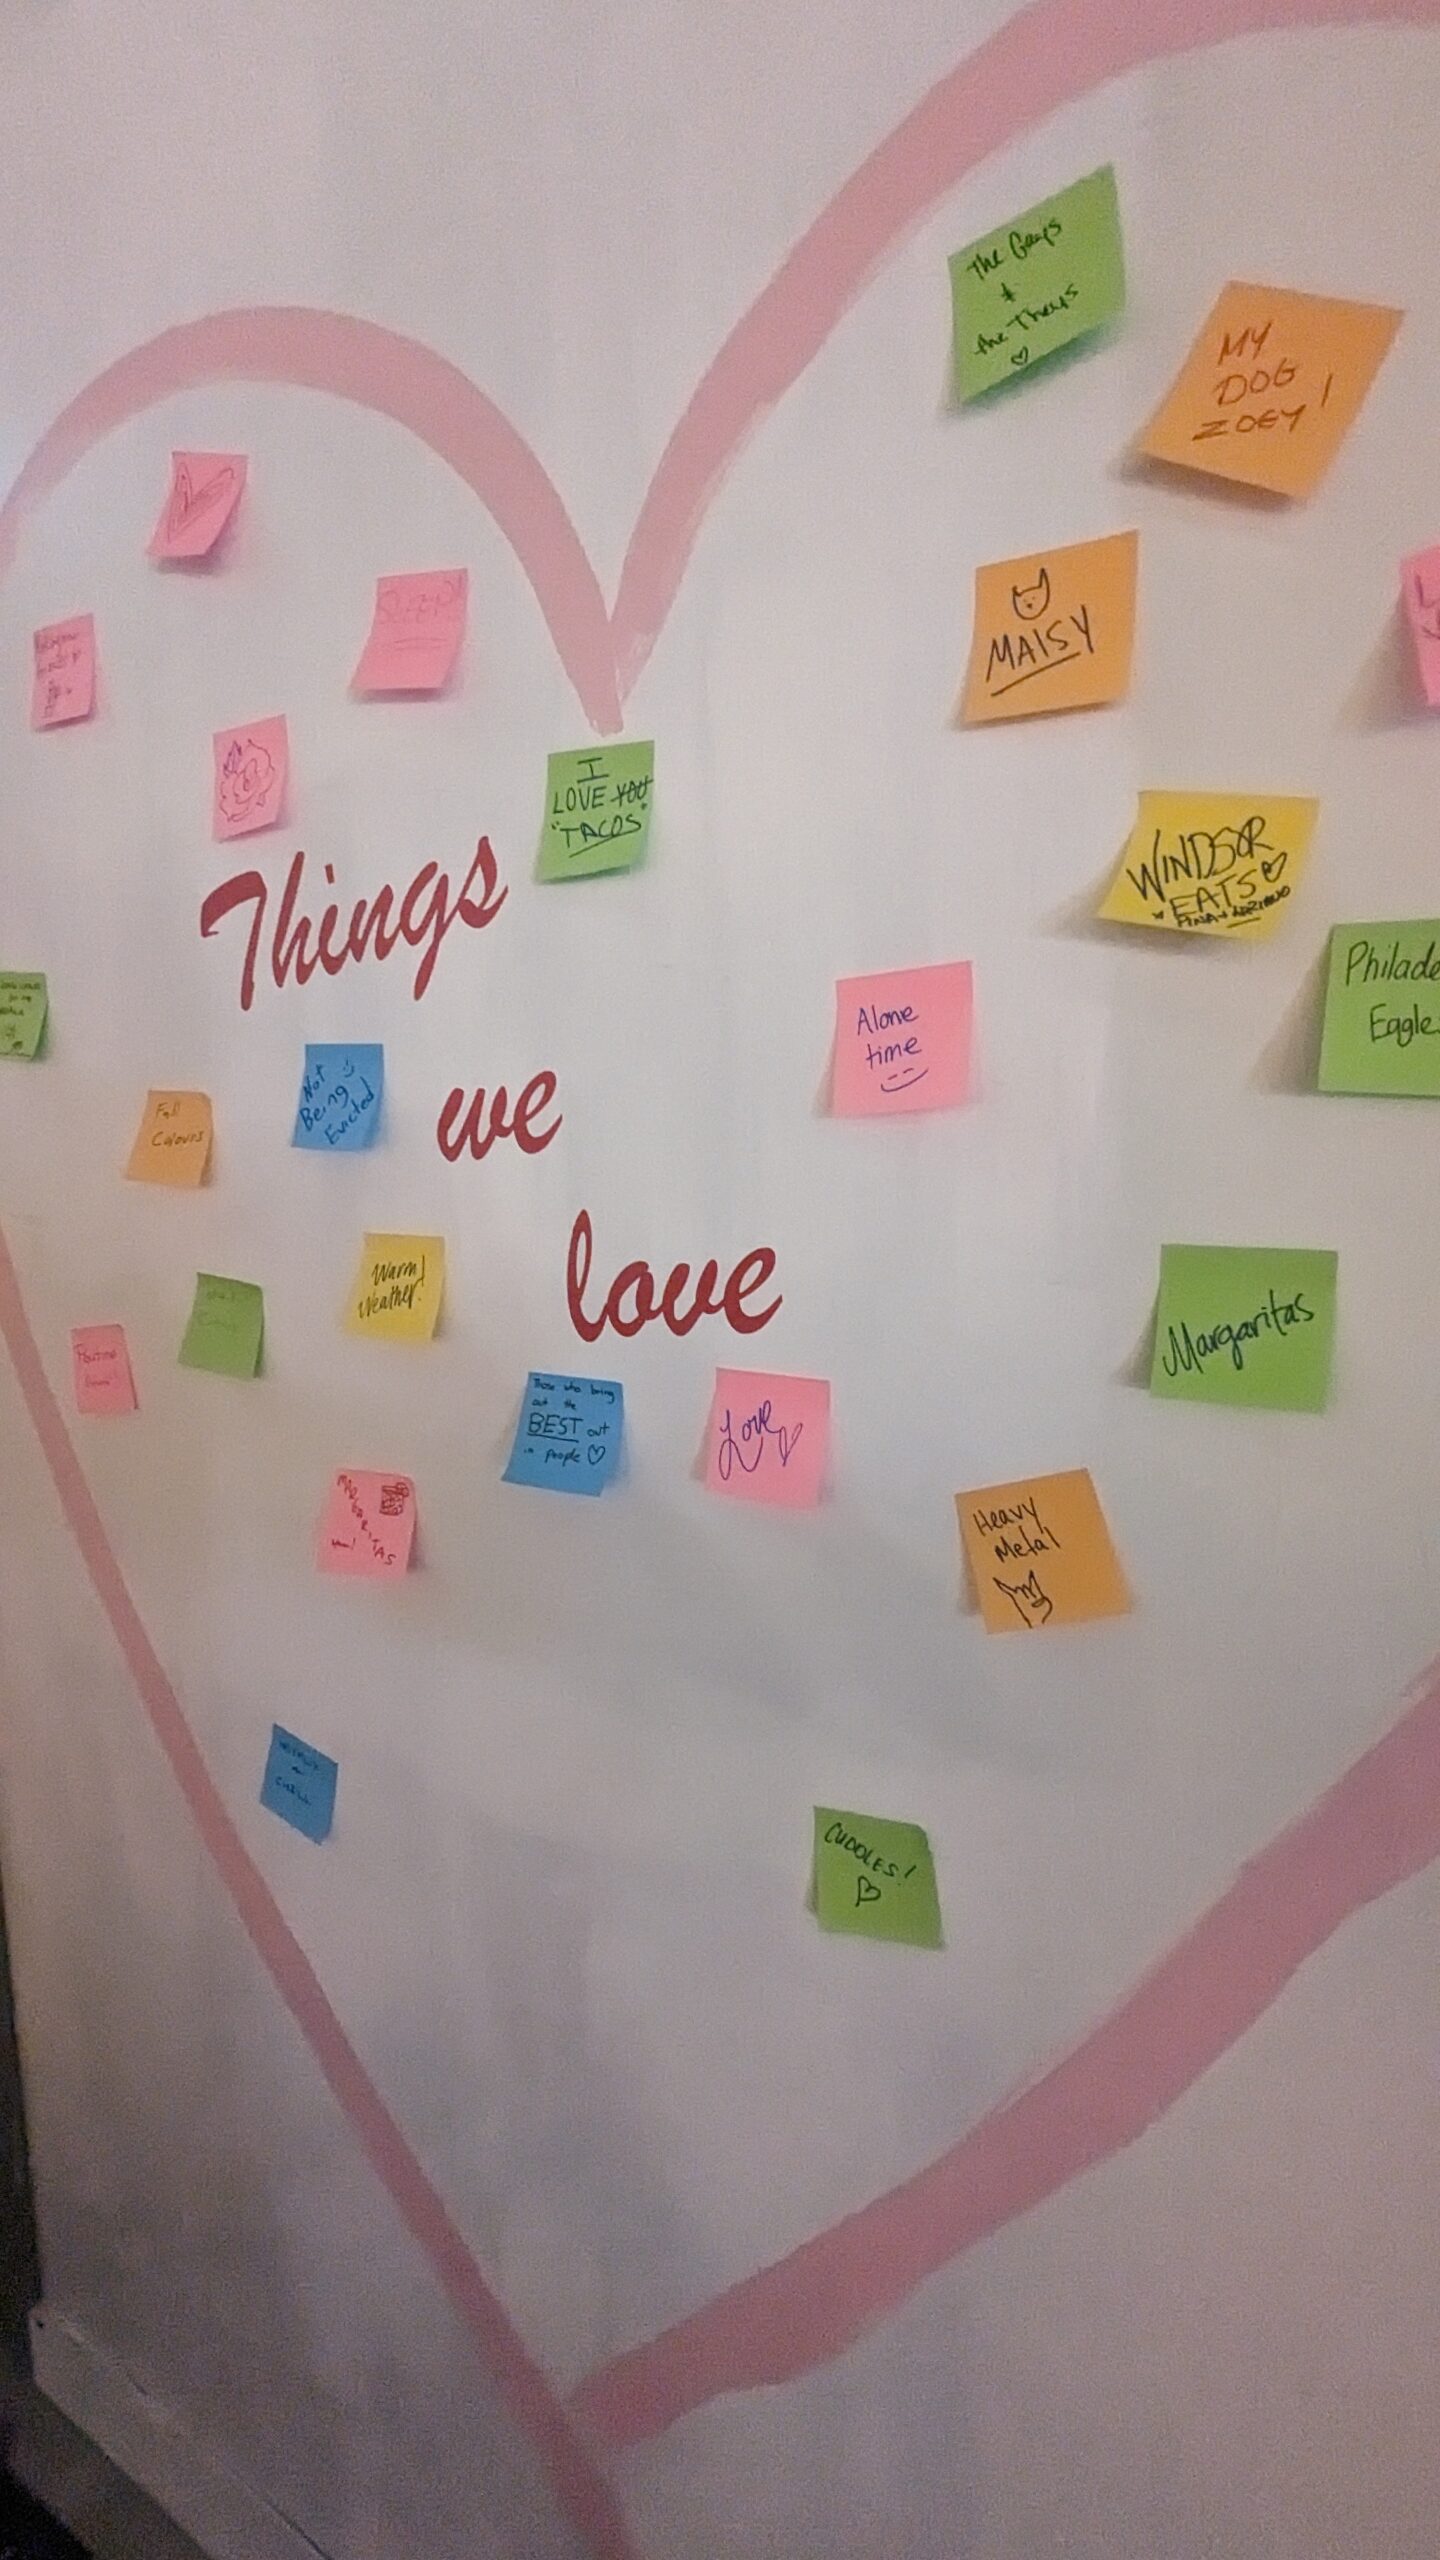 Our "Wall of Love" at WindsorEats in Windsor, Ontario.